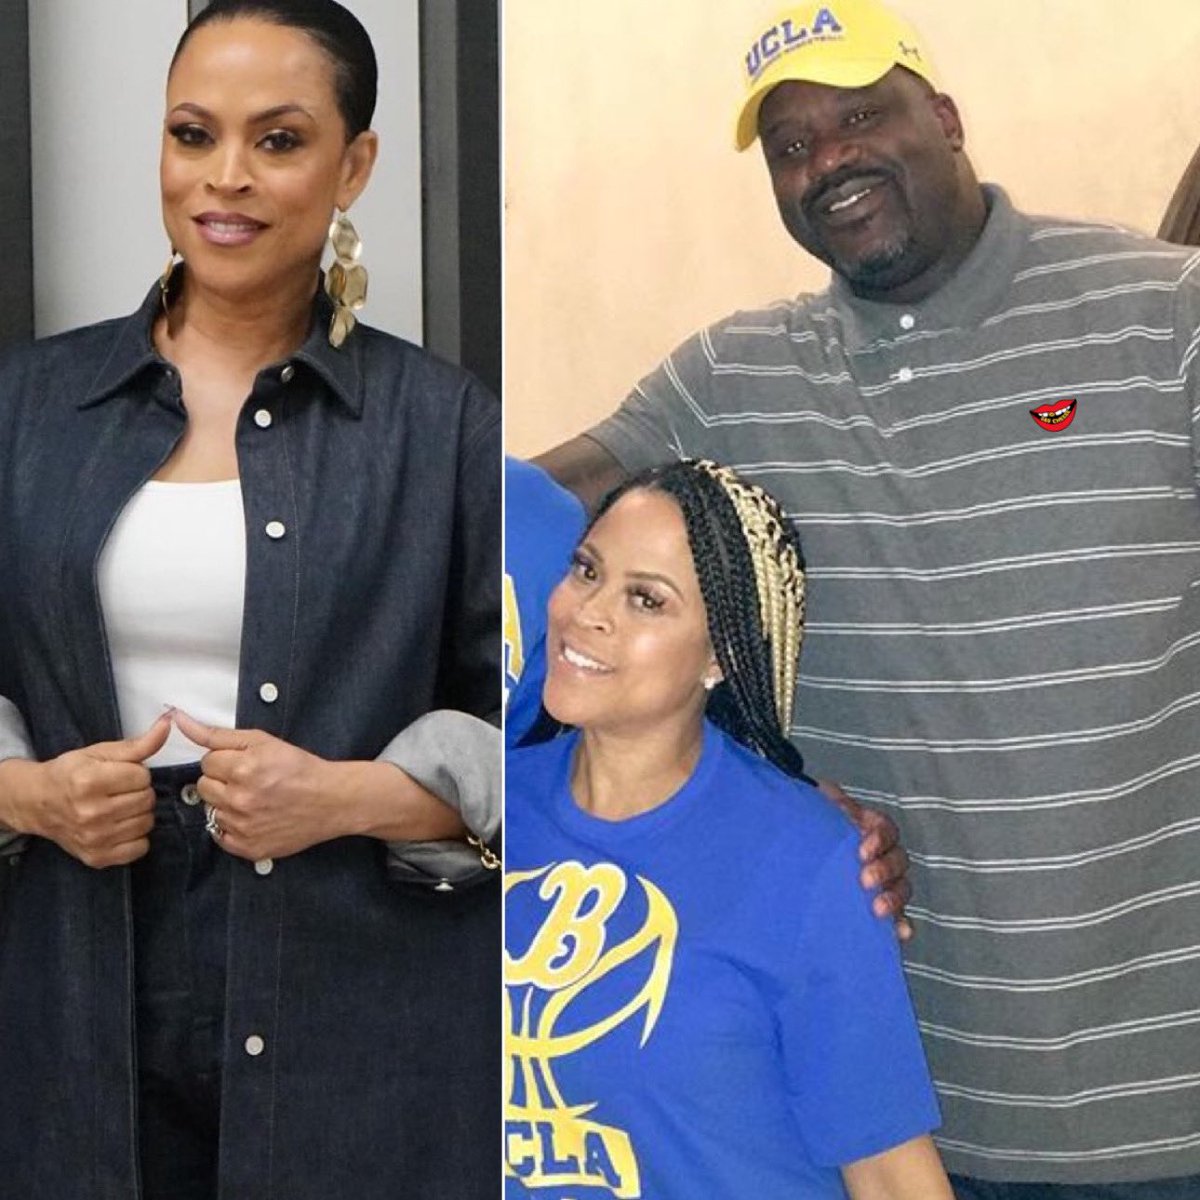 Shaunie Henderson says she doesn’t know if she ever loved SHAQ: “I was in love with the idea of building a life together” 💔